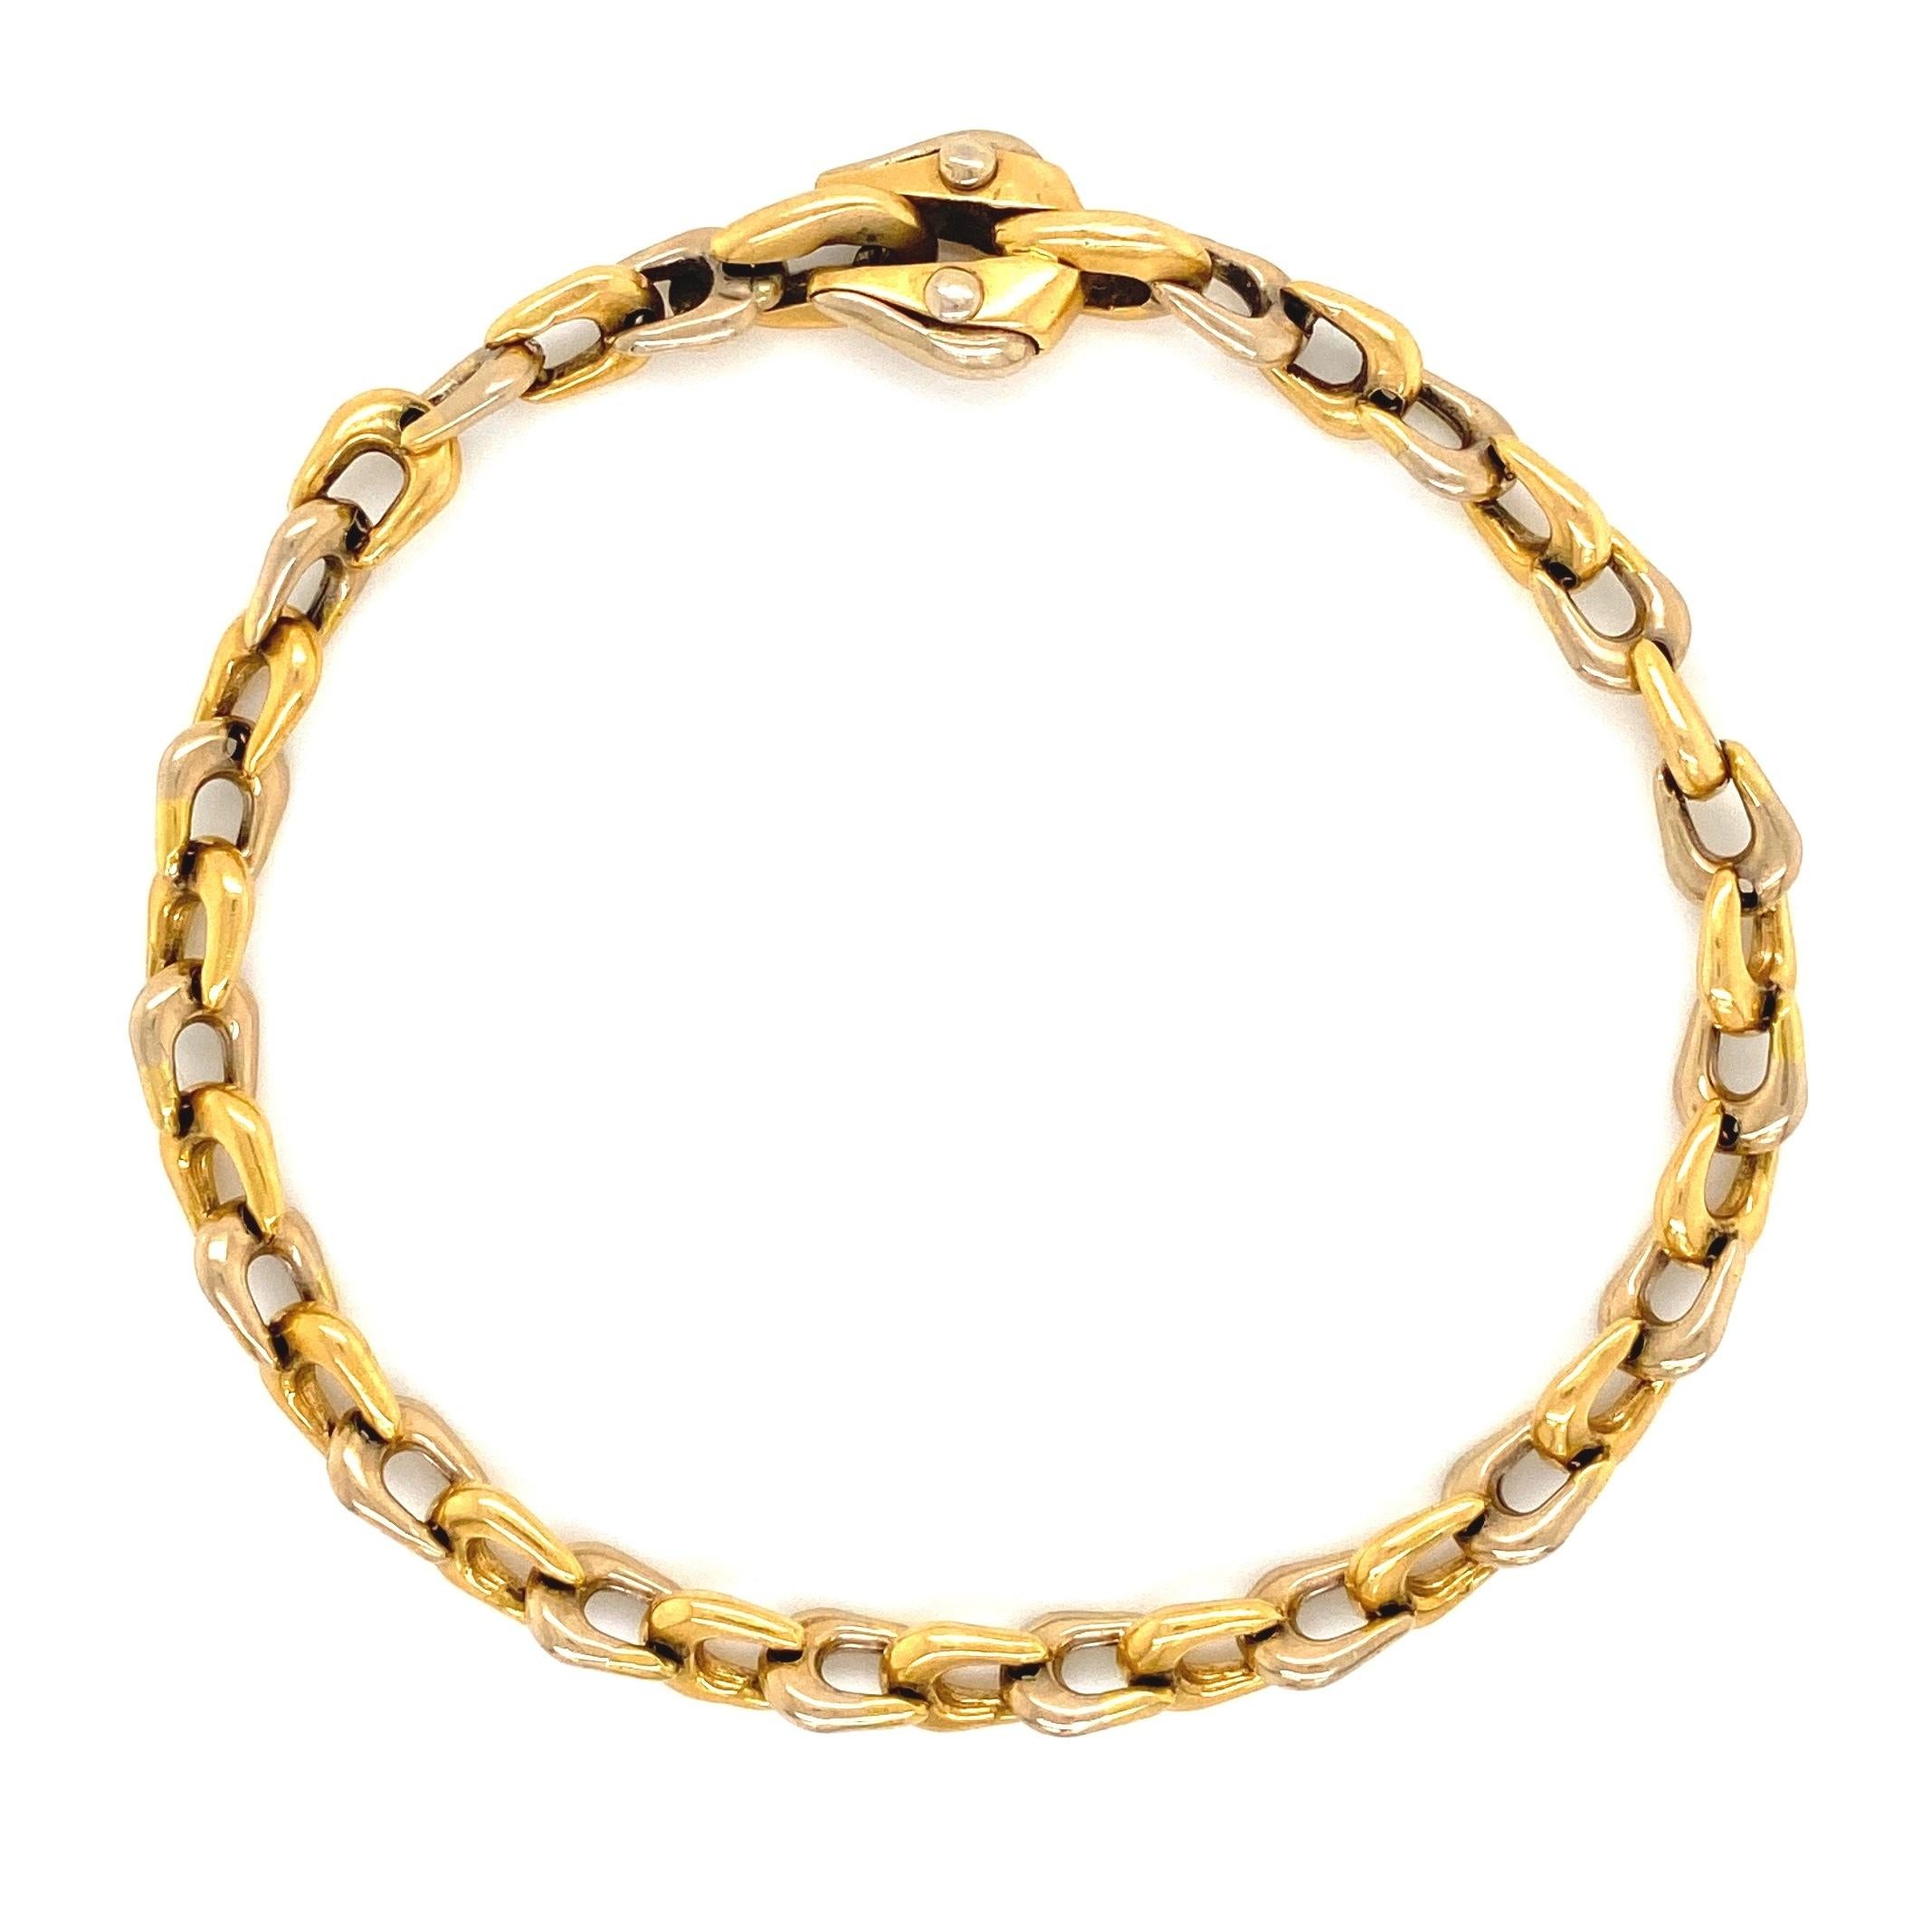 2 Tone Gold Deluxe Link Bracelet Fine Estate Jewelry Estate Fine Jewelry In Excellent Condition For Sale In Montreal, QC